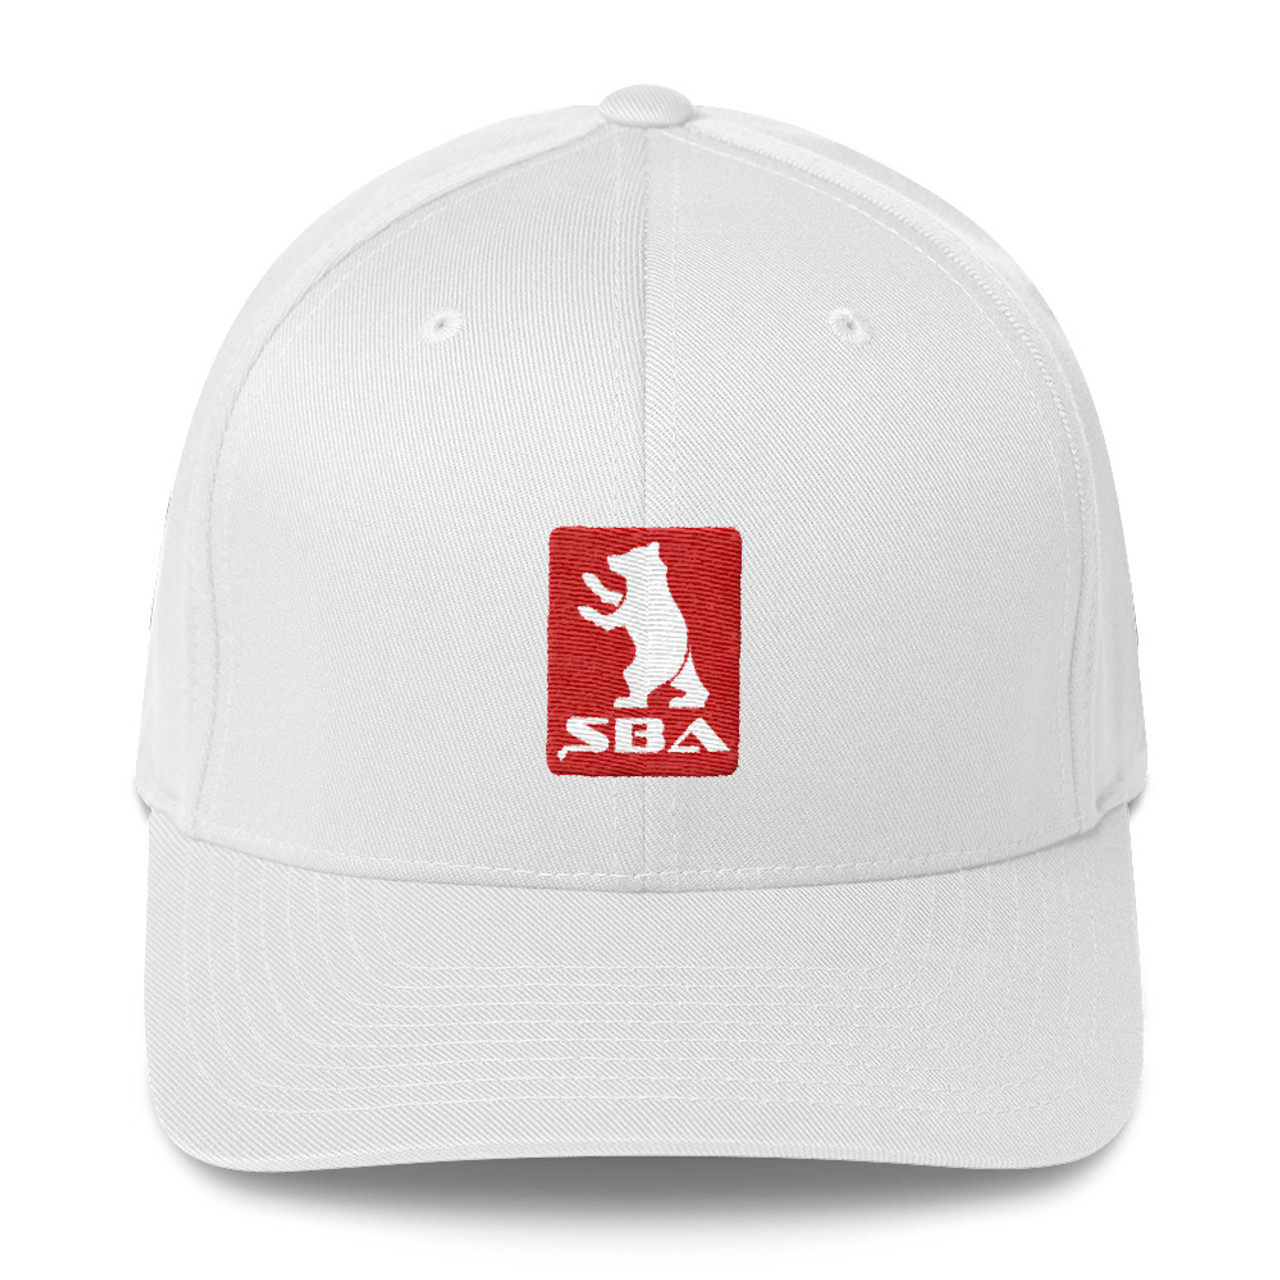 - Twill Series Panel in Gear SBA White 6 Structured Classic Cap